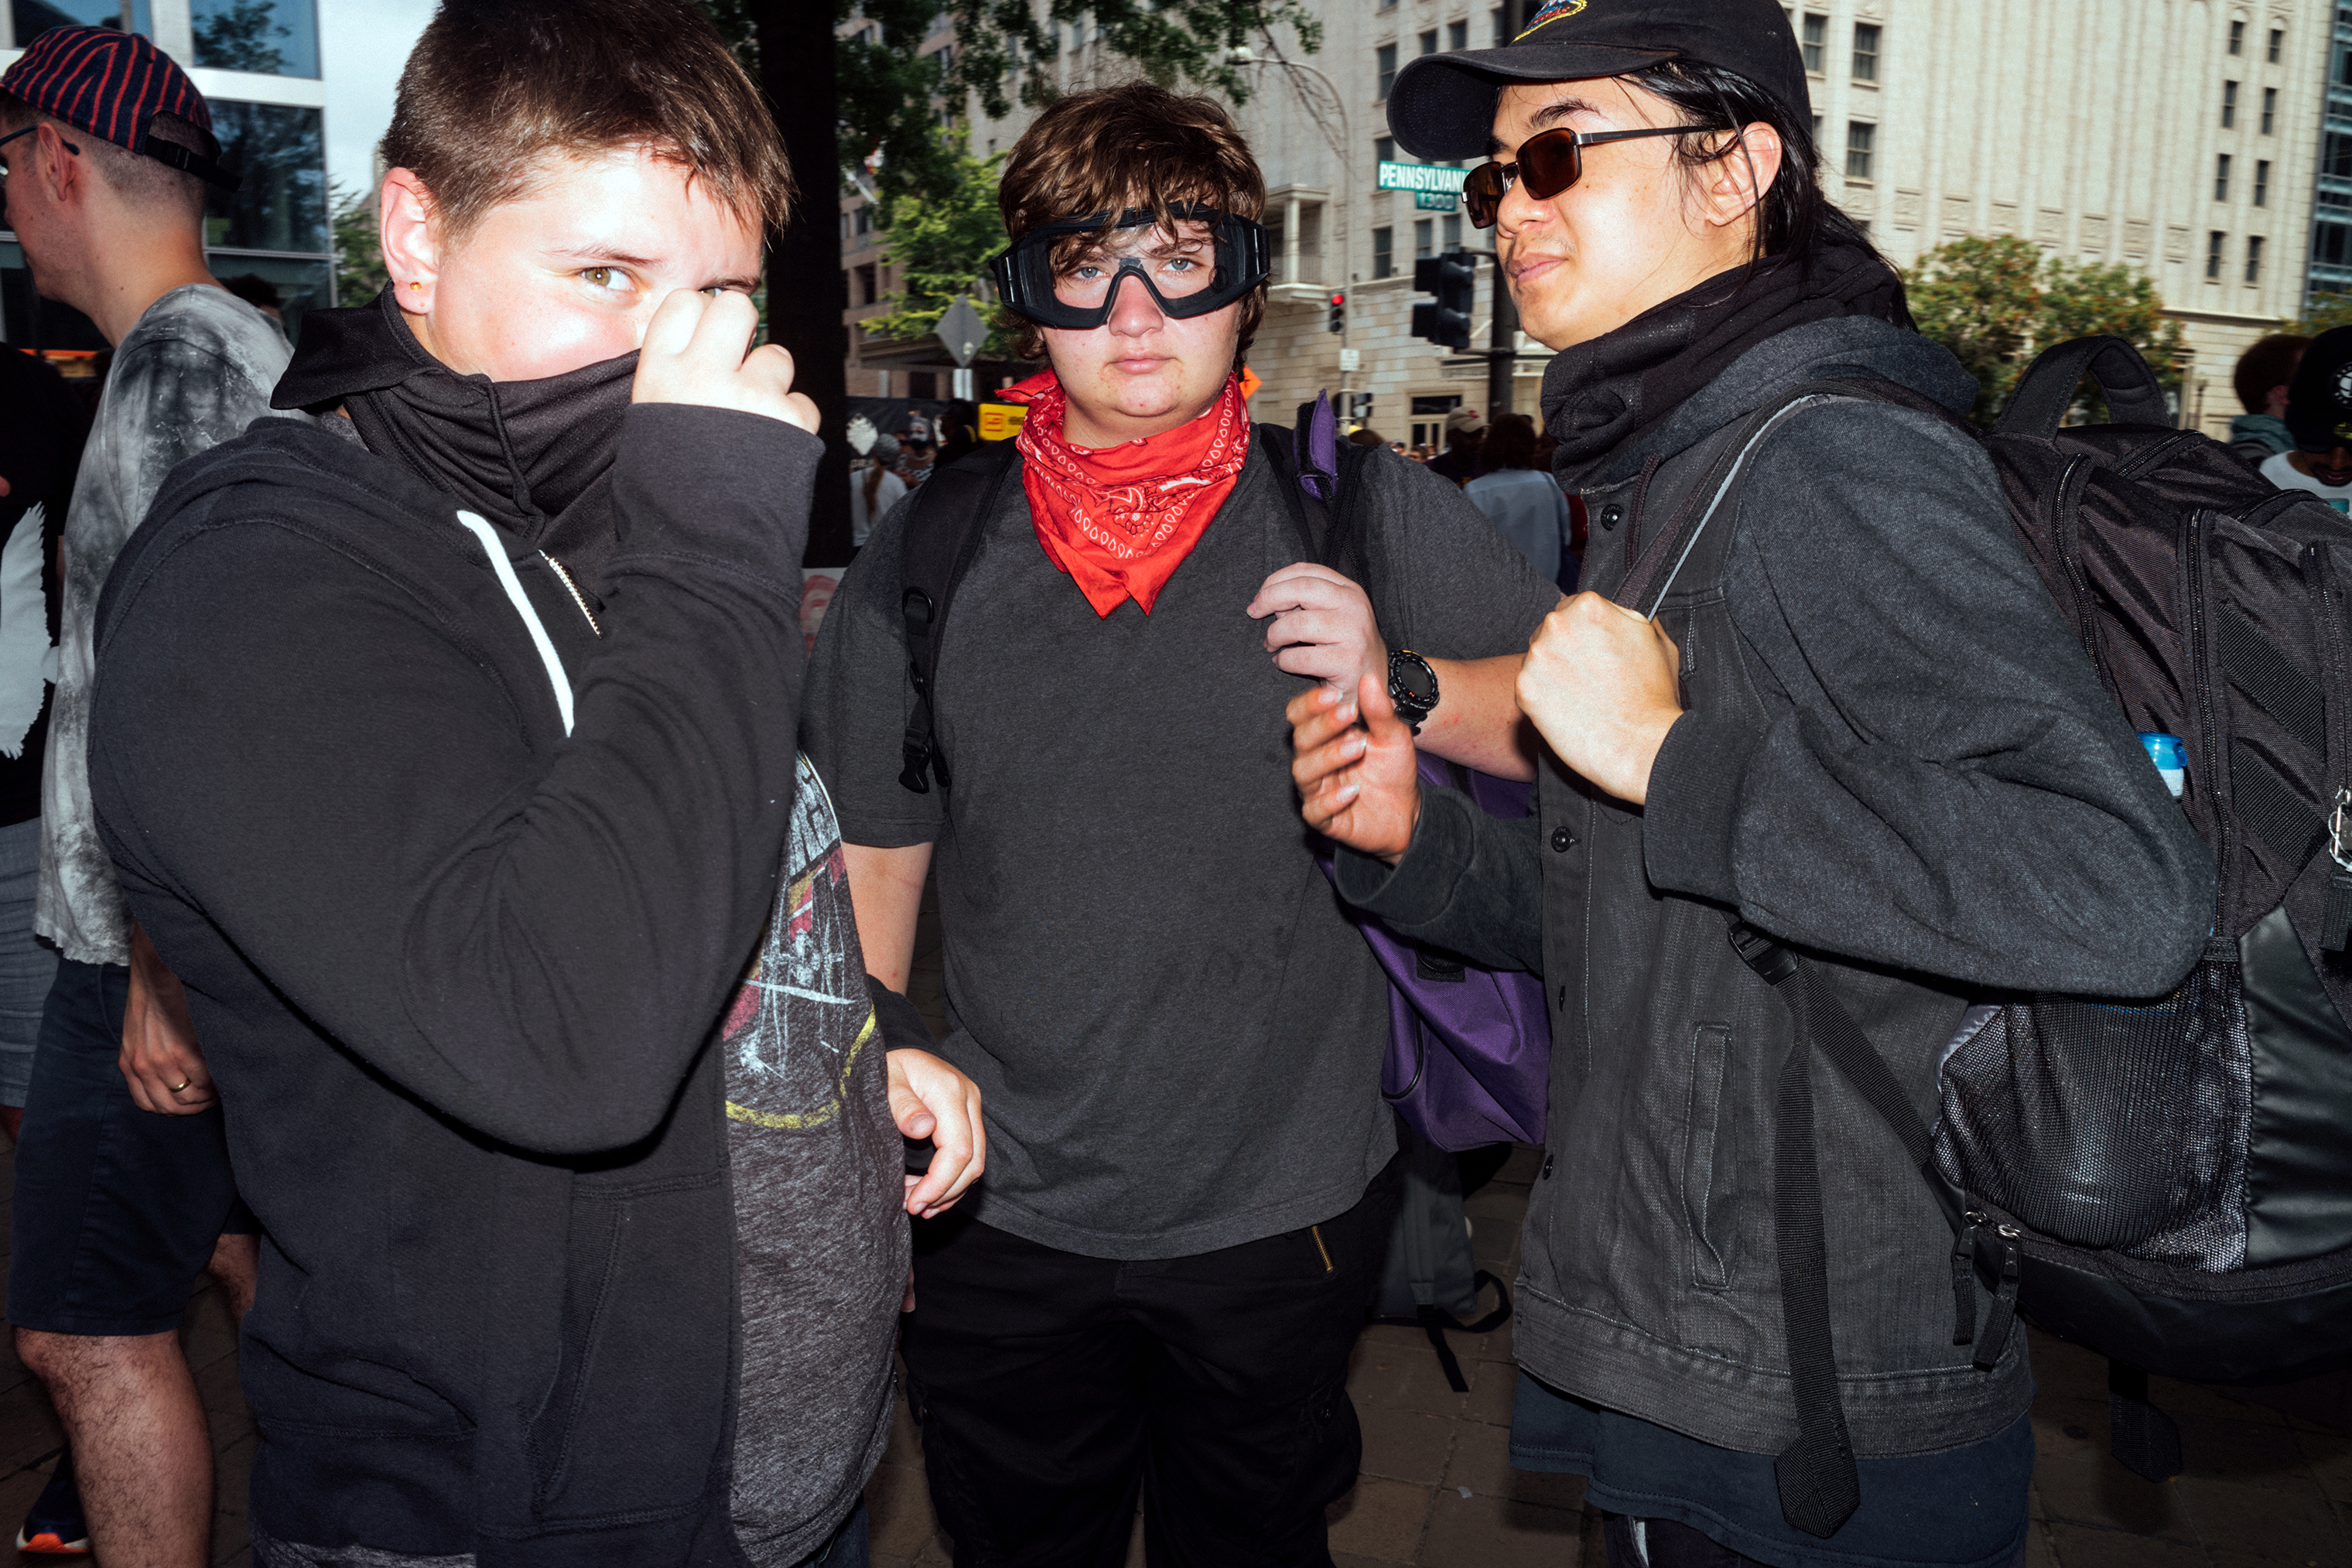 Three counter-protesters who attended the opposition demonstration at Freedom Plaza. (Daniel Arnold for TIME)